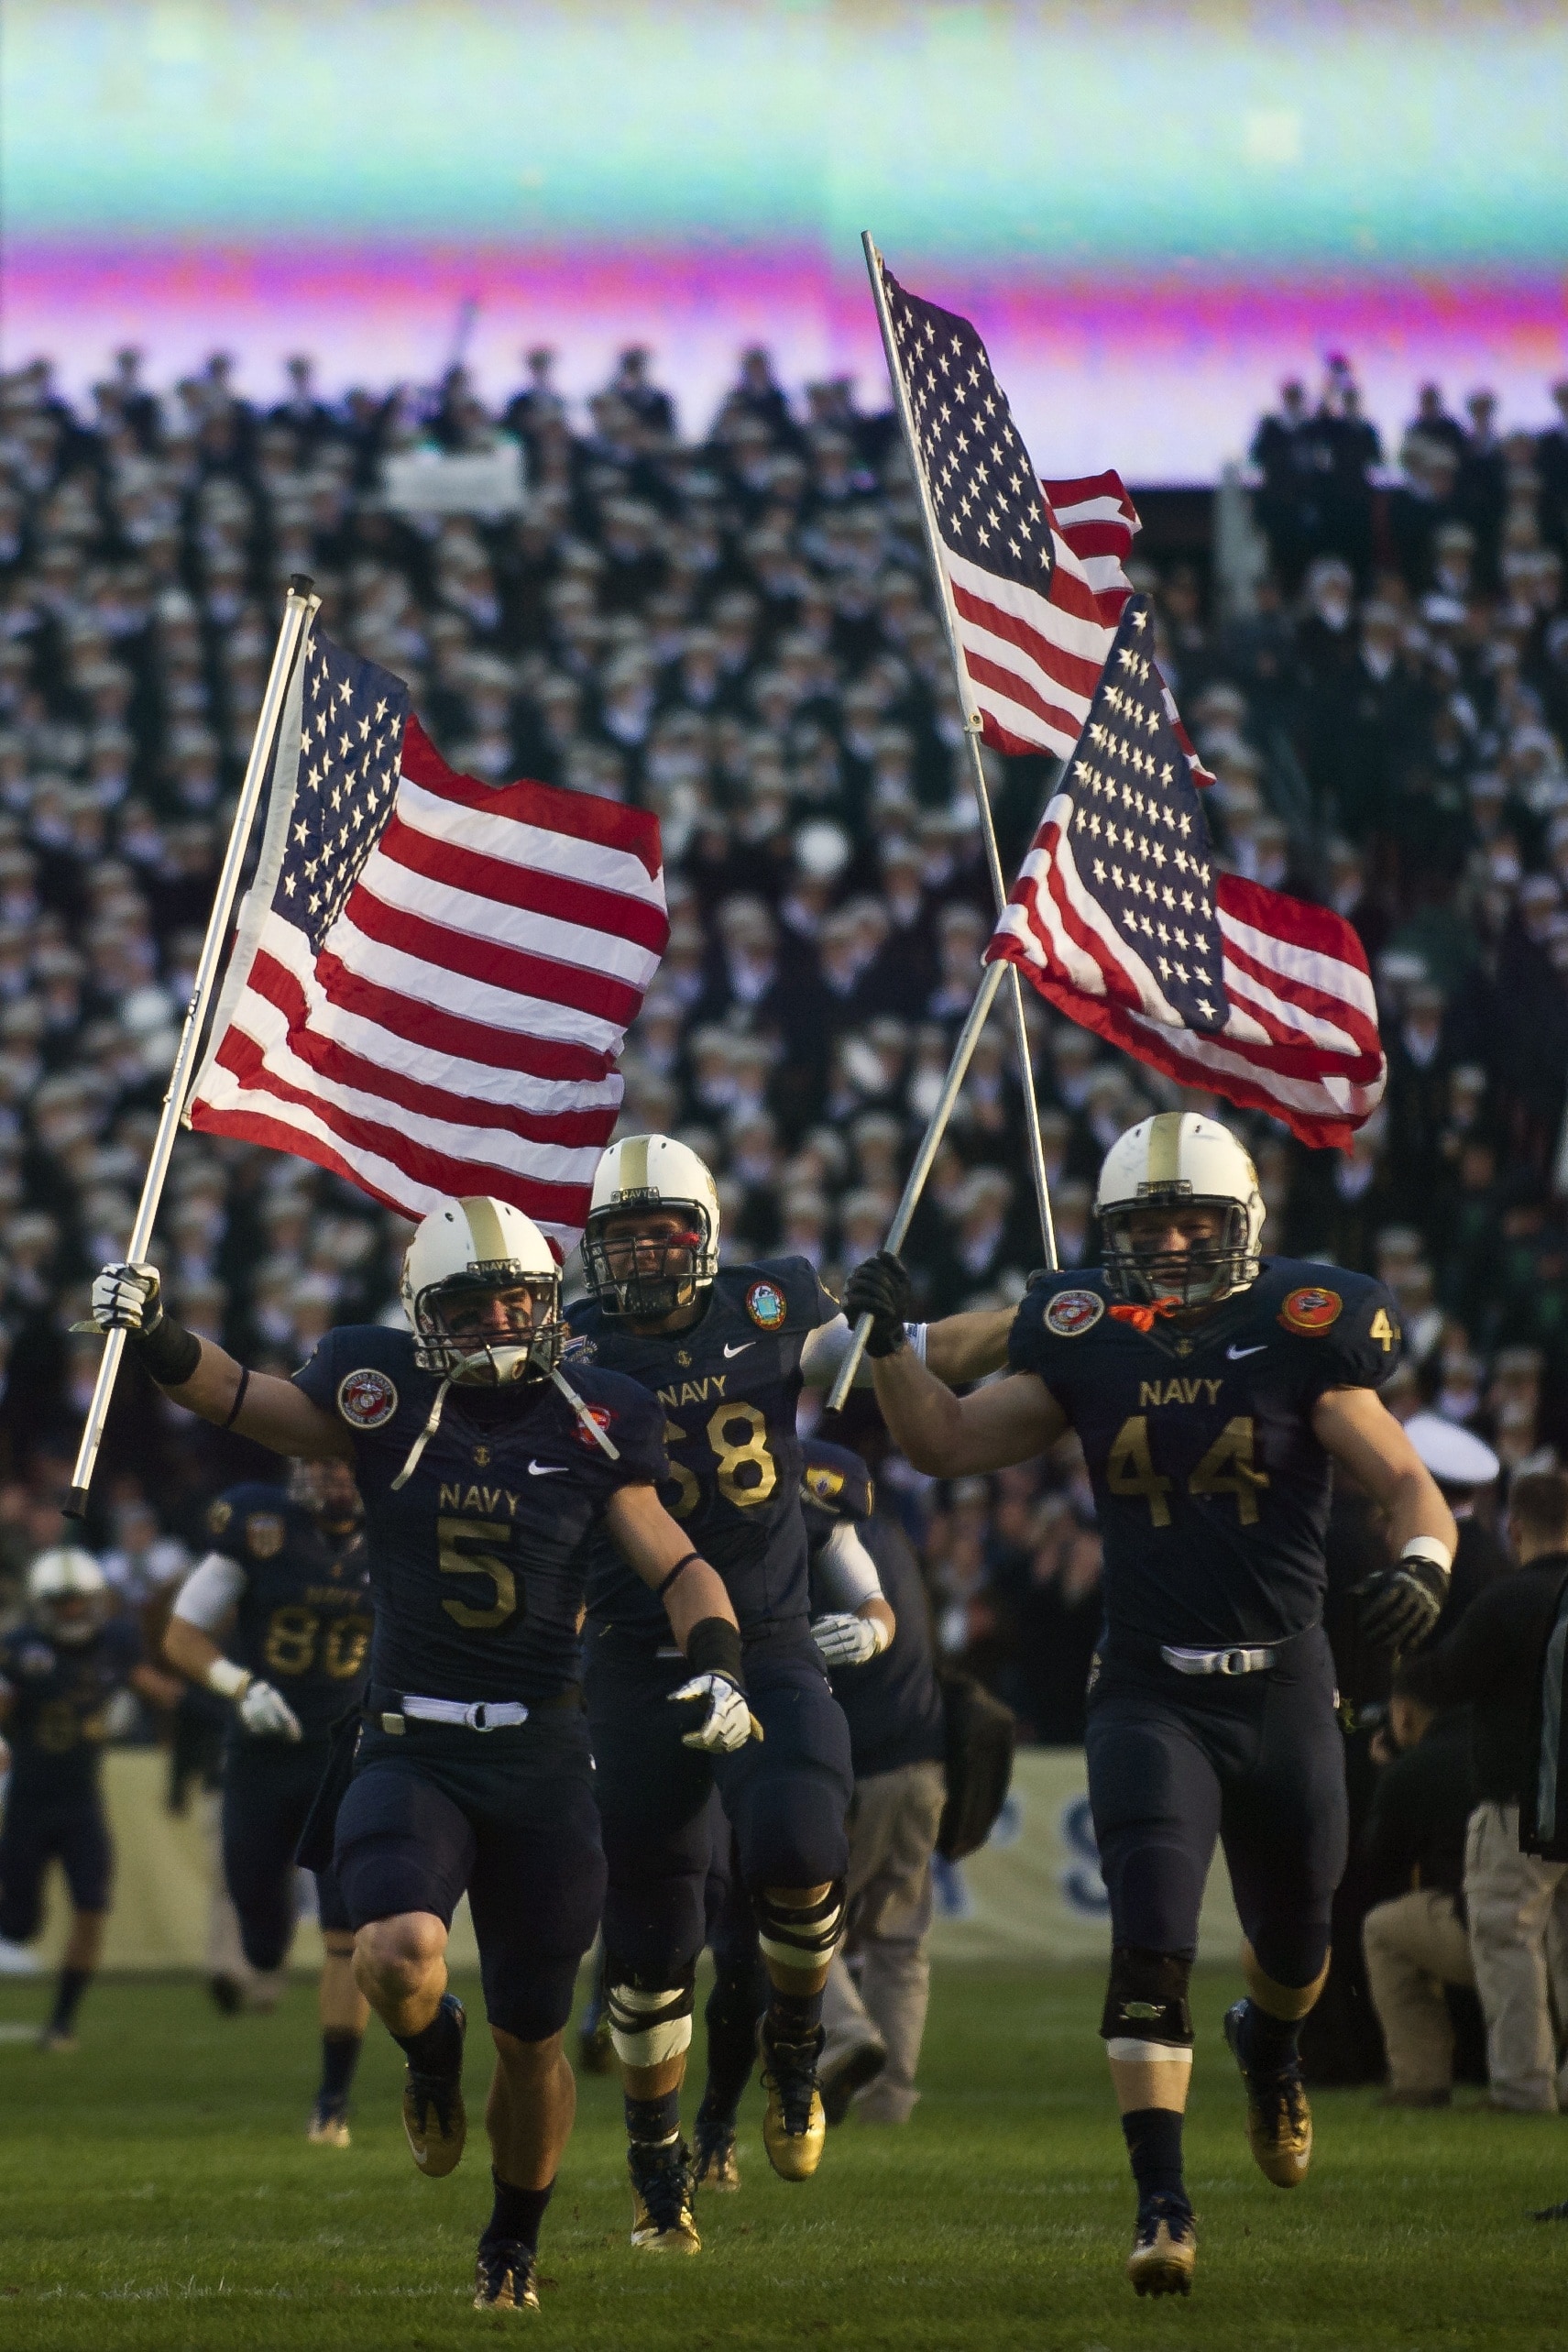 Army Navy Game, American Football, flag, cultures